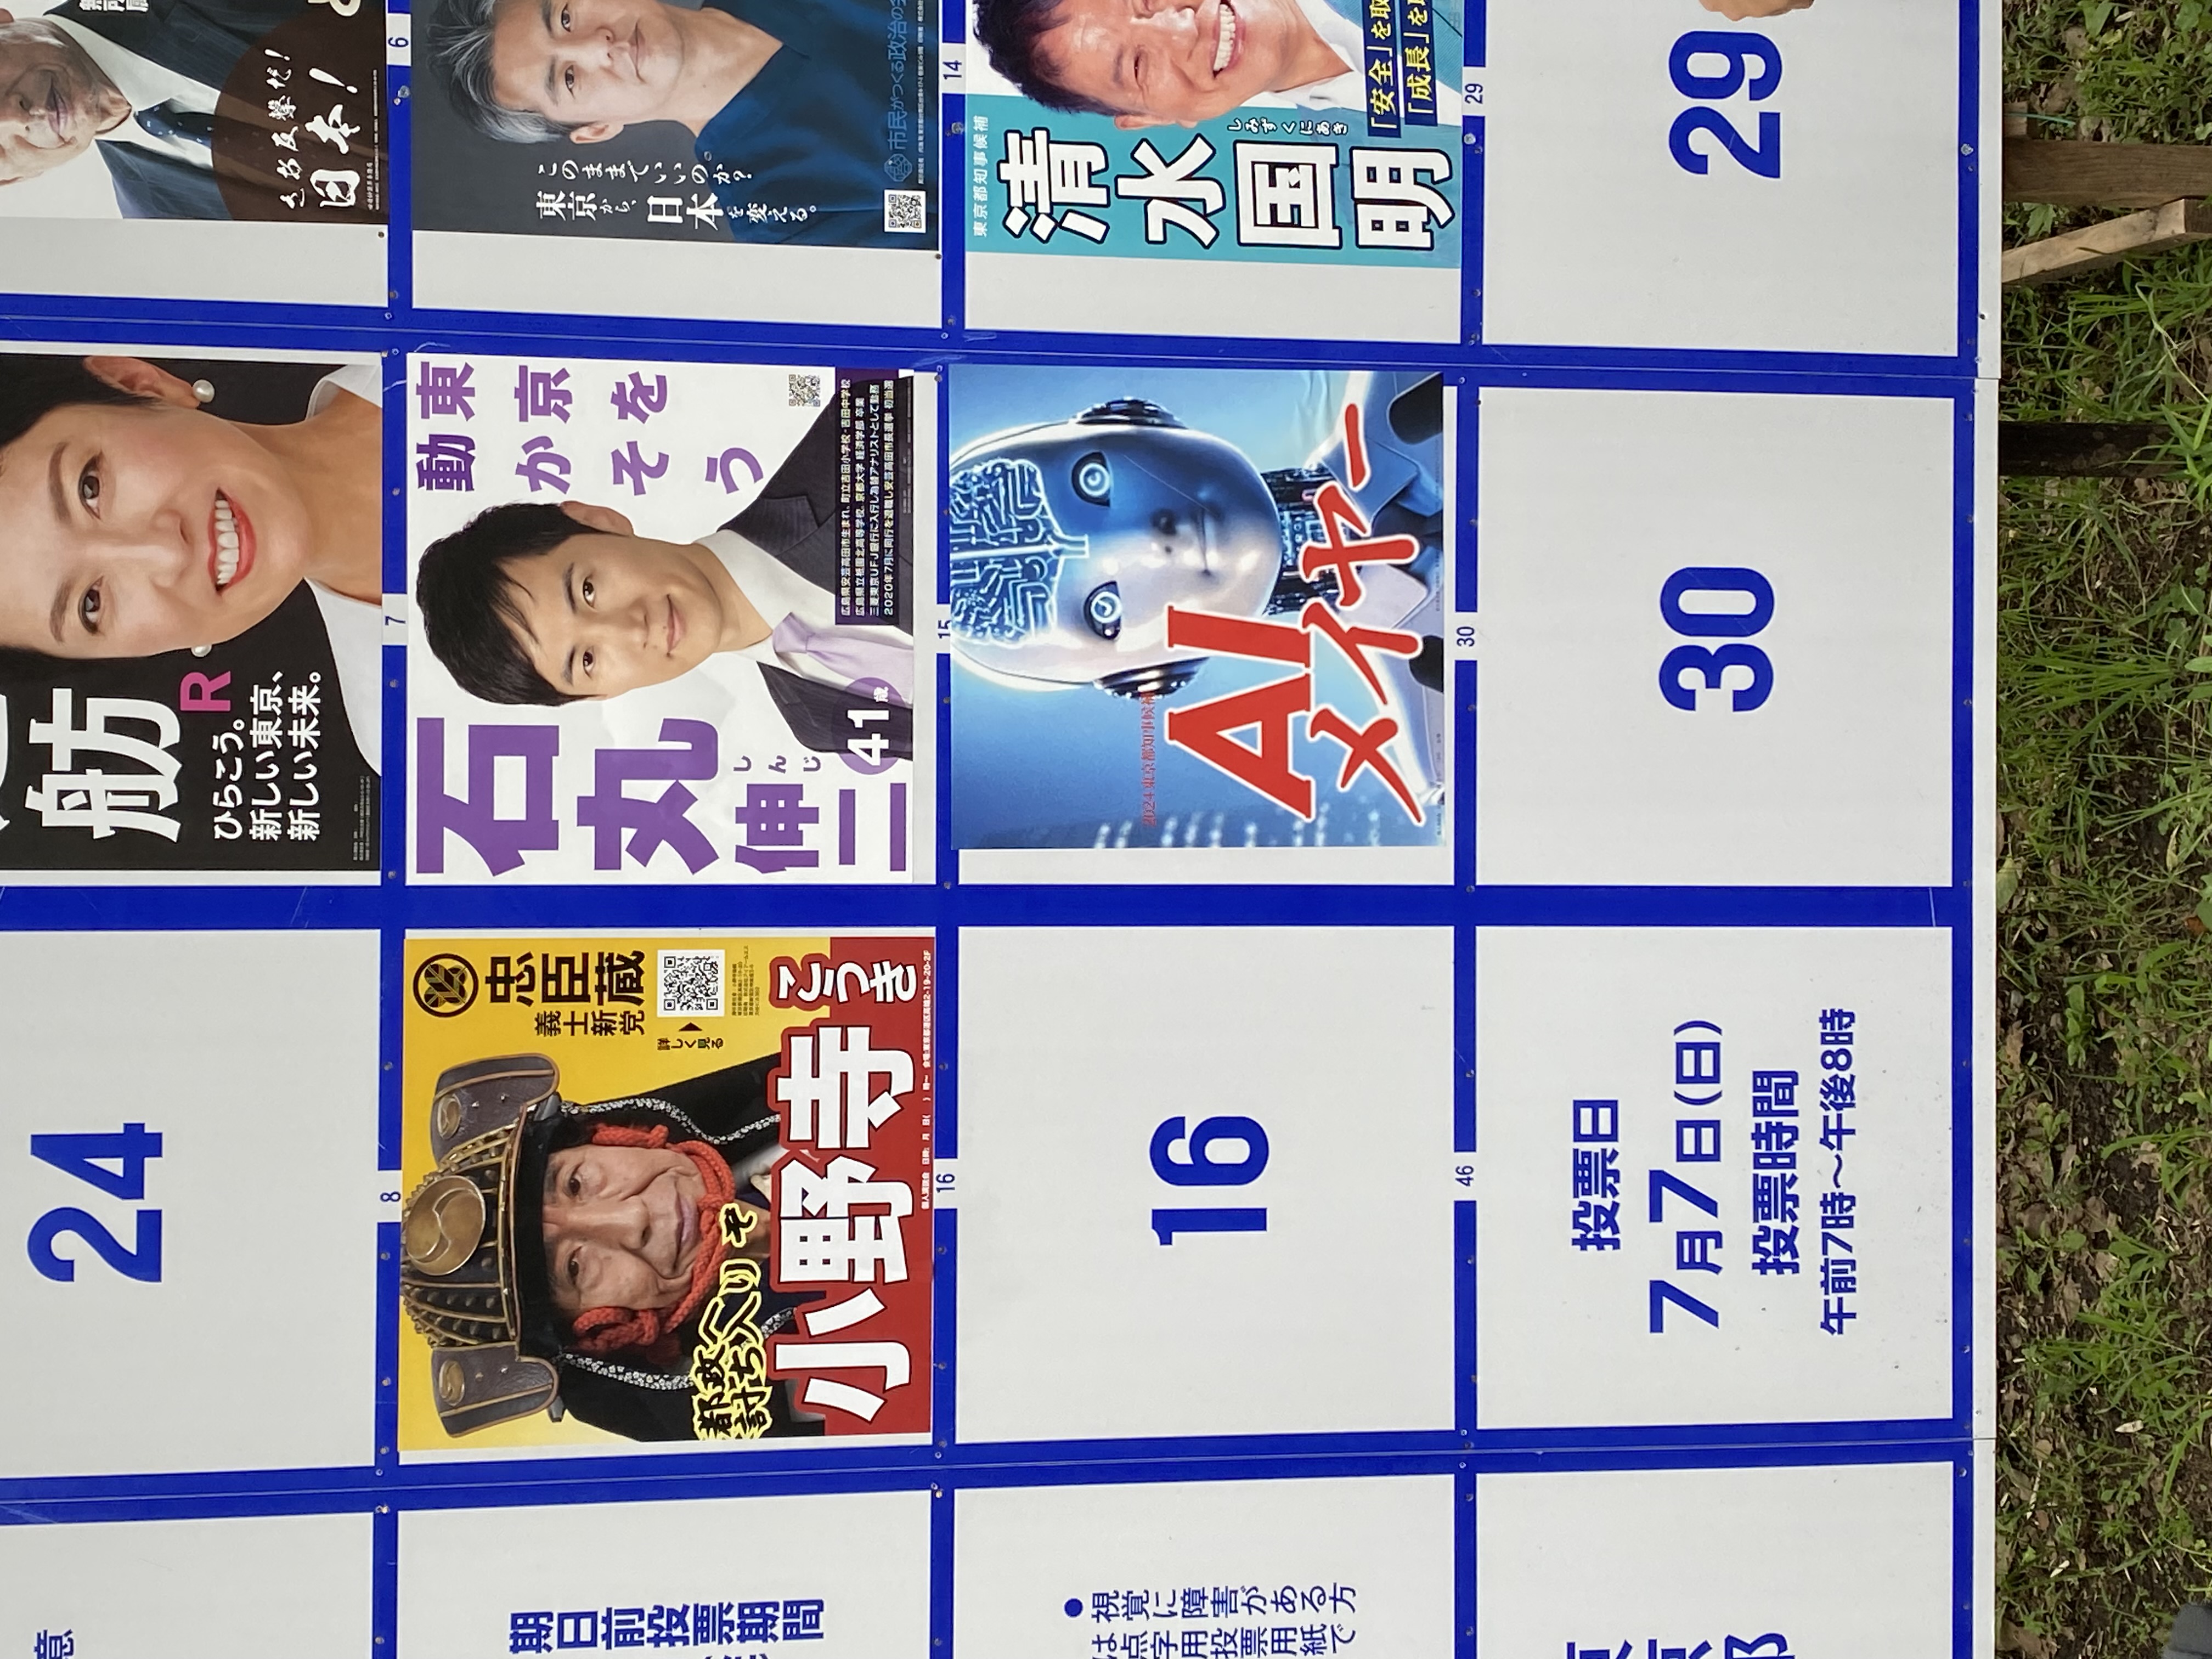 A collection of posters for the Tokyo governor election, with an anonymous “AI mayor” candidate from the “AI party”